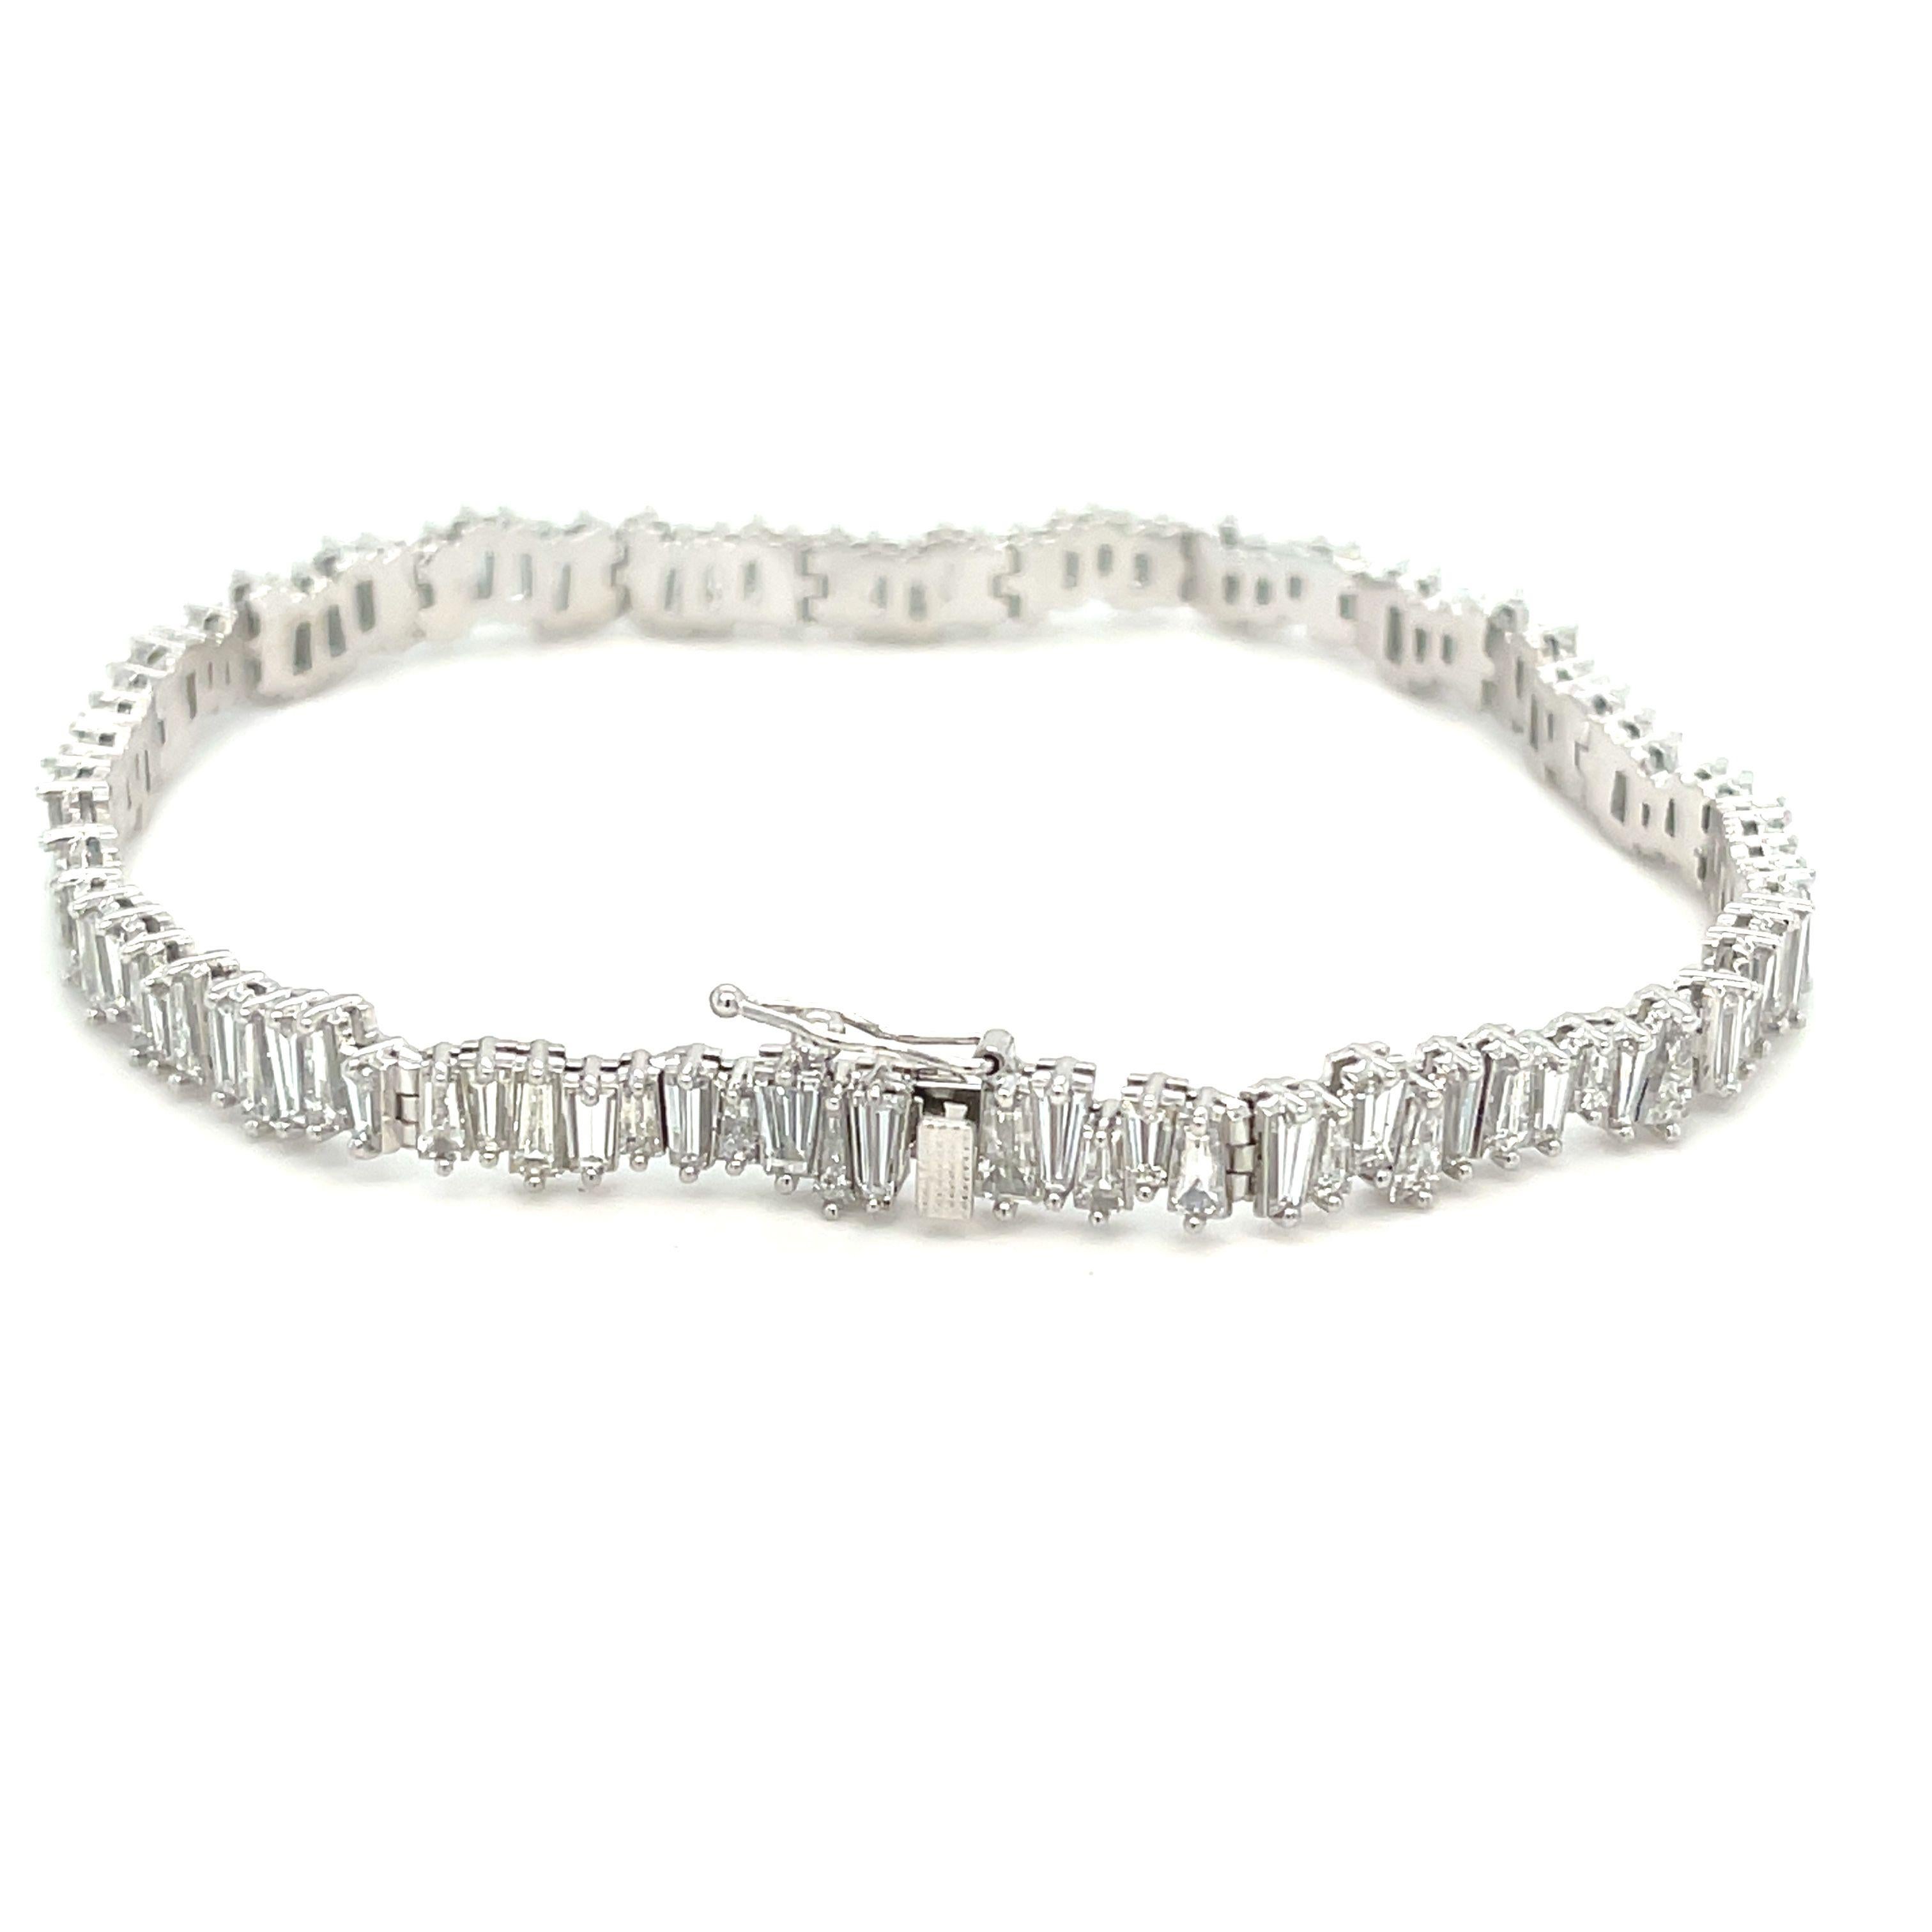 18K White Gold Tapered Baguette Line Bracelet G-H VS1-VS2 8.07 Ctw

PRIMARY DETAILS
SKU: 130866
Listing Title: 18K White Gold Tapered Baguette Line Bracelet G-H VS1-VS2 8.07 Ctw
Condition Description: In excellent condition. 7 inches in Length
Metal